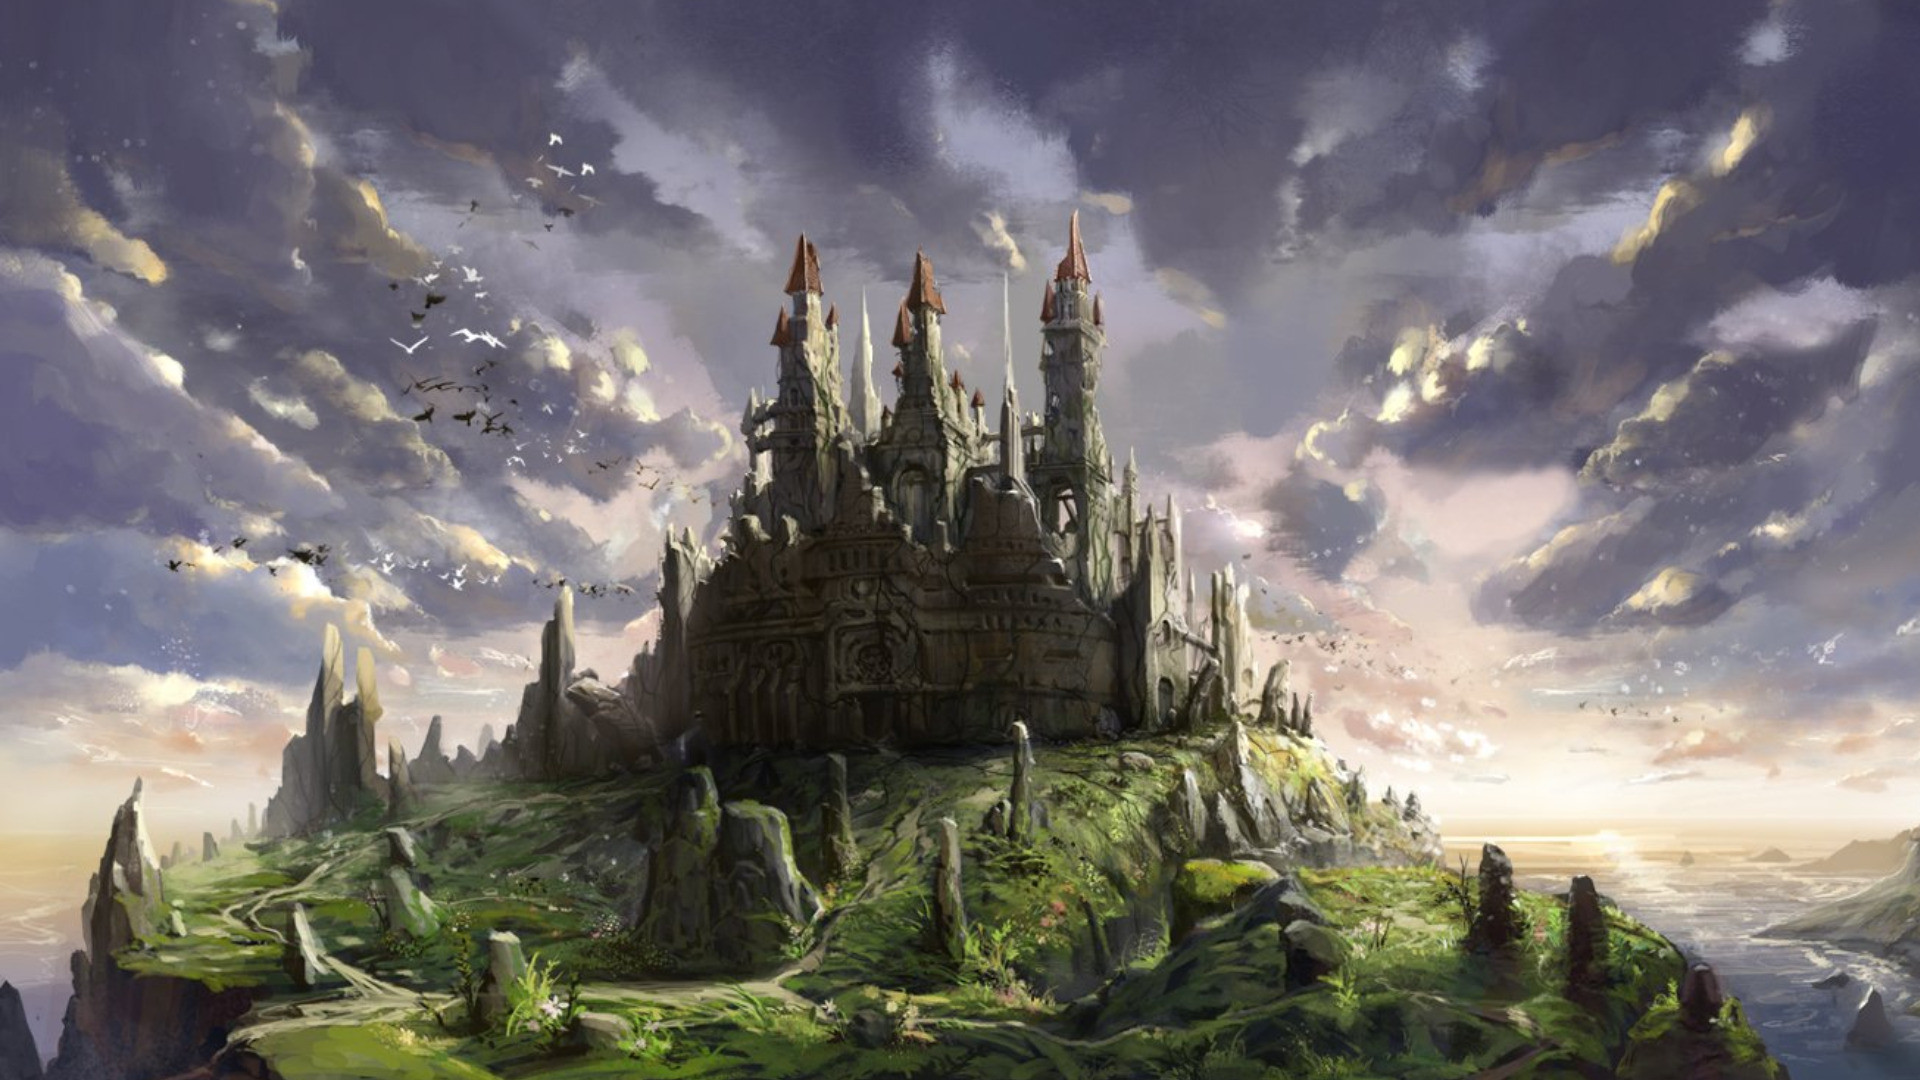 Coders | Wallpaper Abyss Everything Castles Fantasy Castle 267729